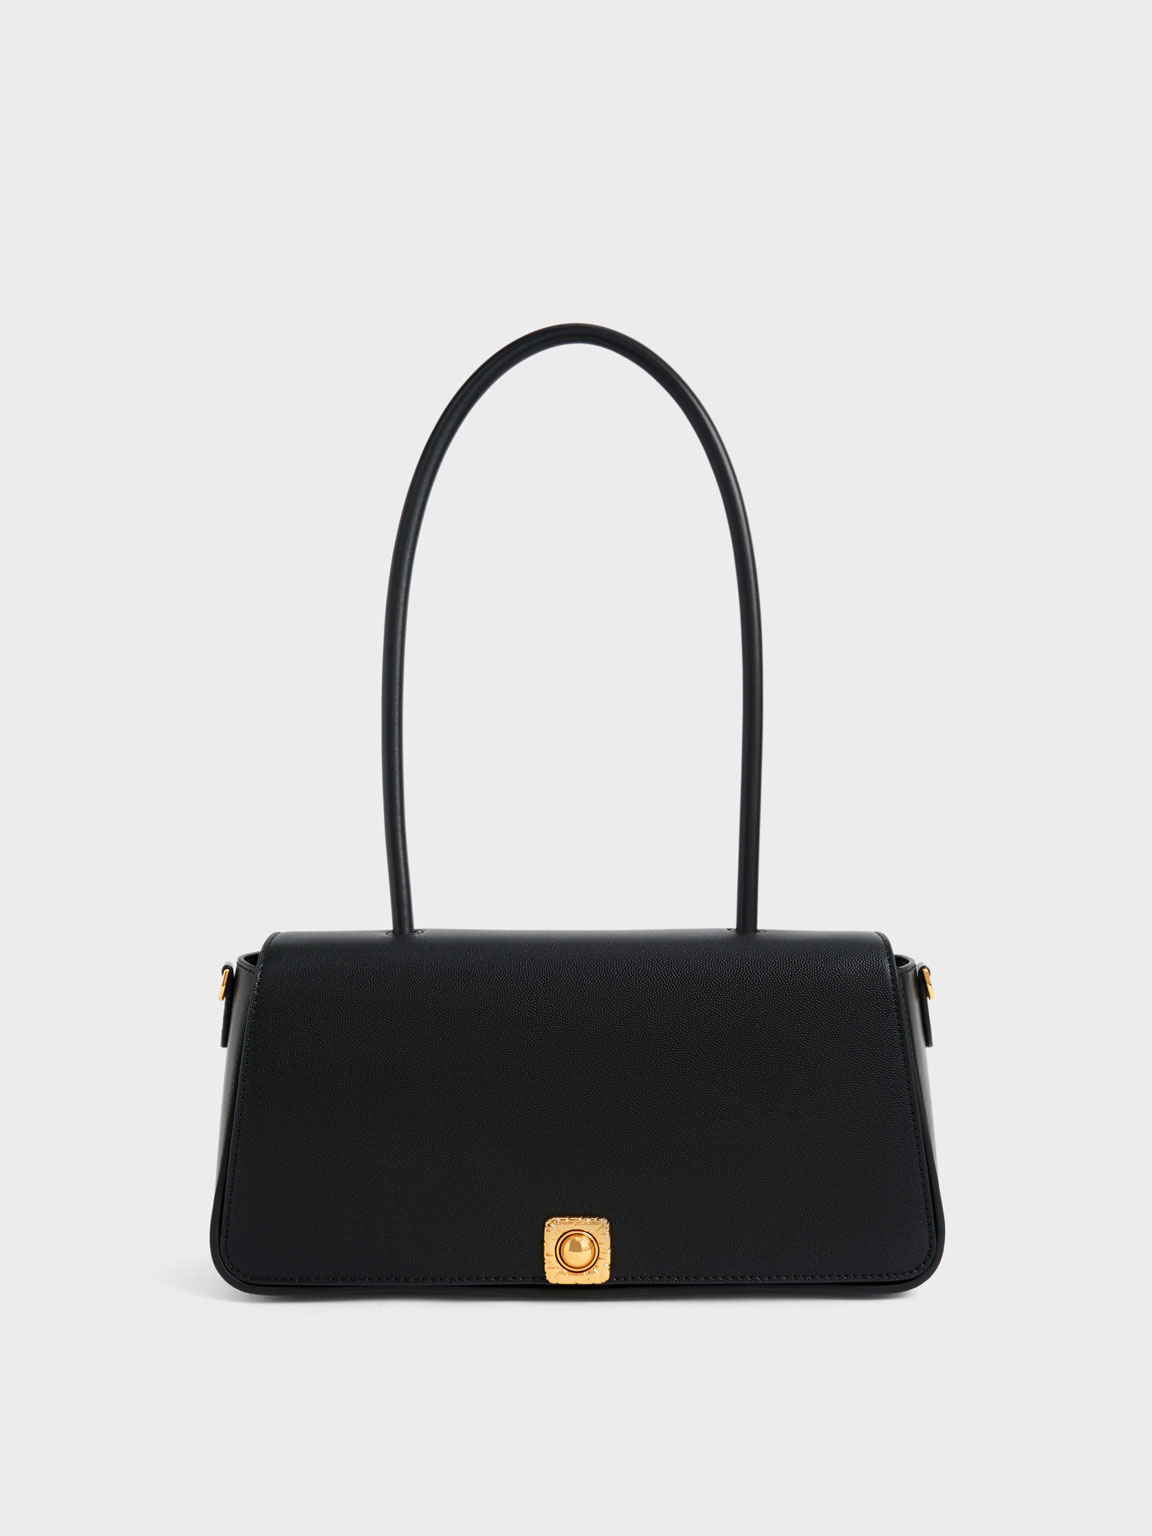 The 42 Best Black Handbags to Shop at Every Price Point